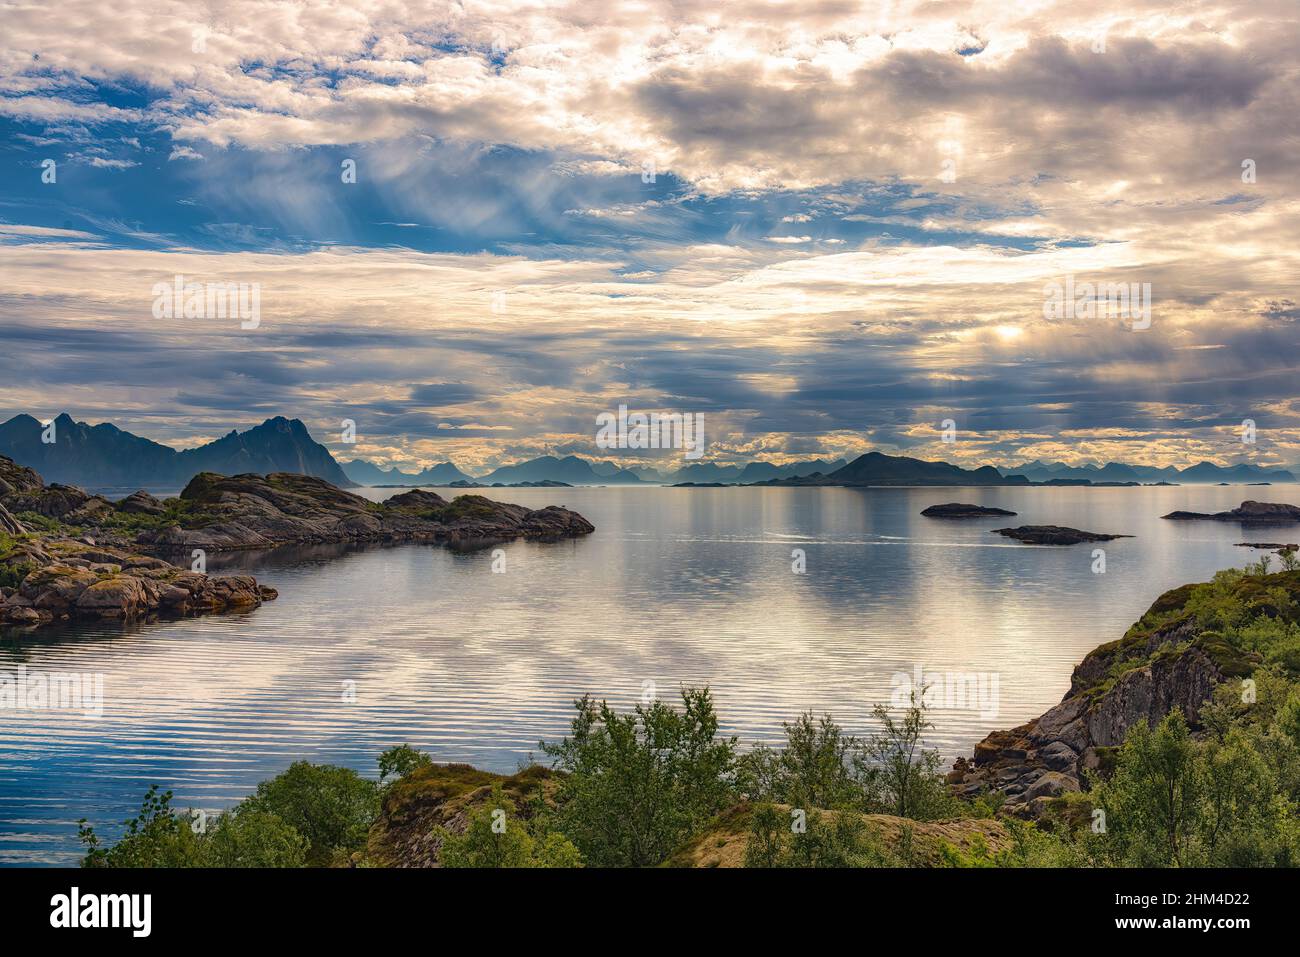 Lofoten coastline near Svolvaer, Norway. Lofoten archipelago is known for a distinctive scenery with dramatic mountains and peaks Stock Photo